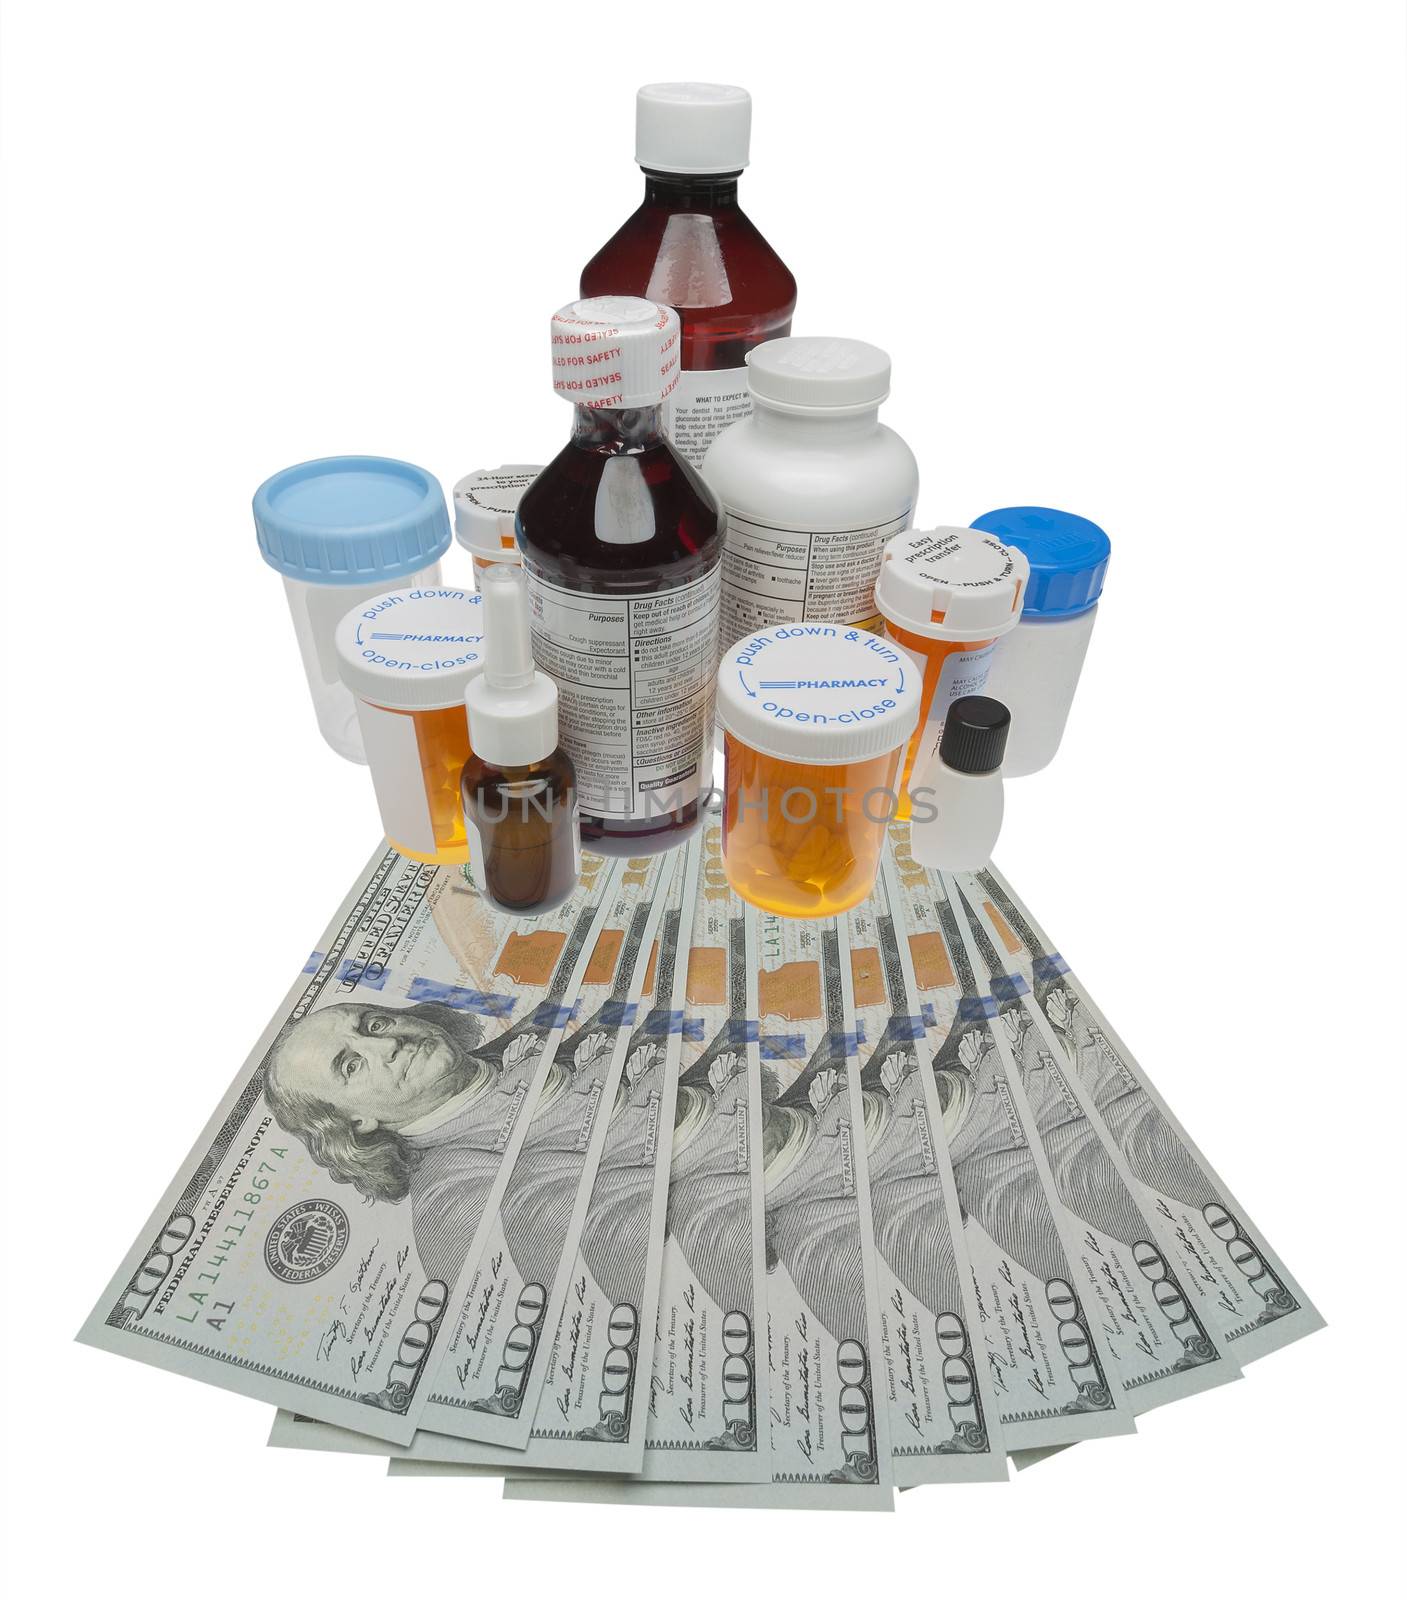 cost of drugs in our health care systems